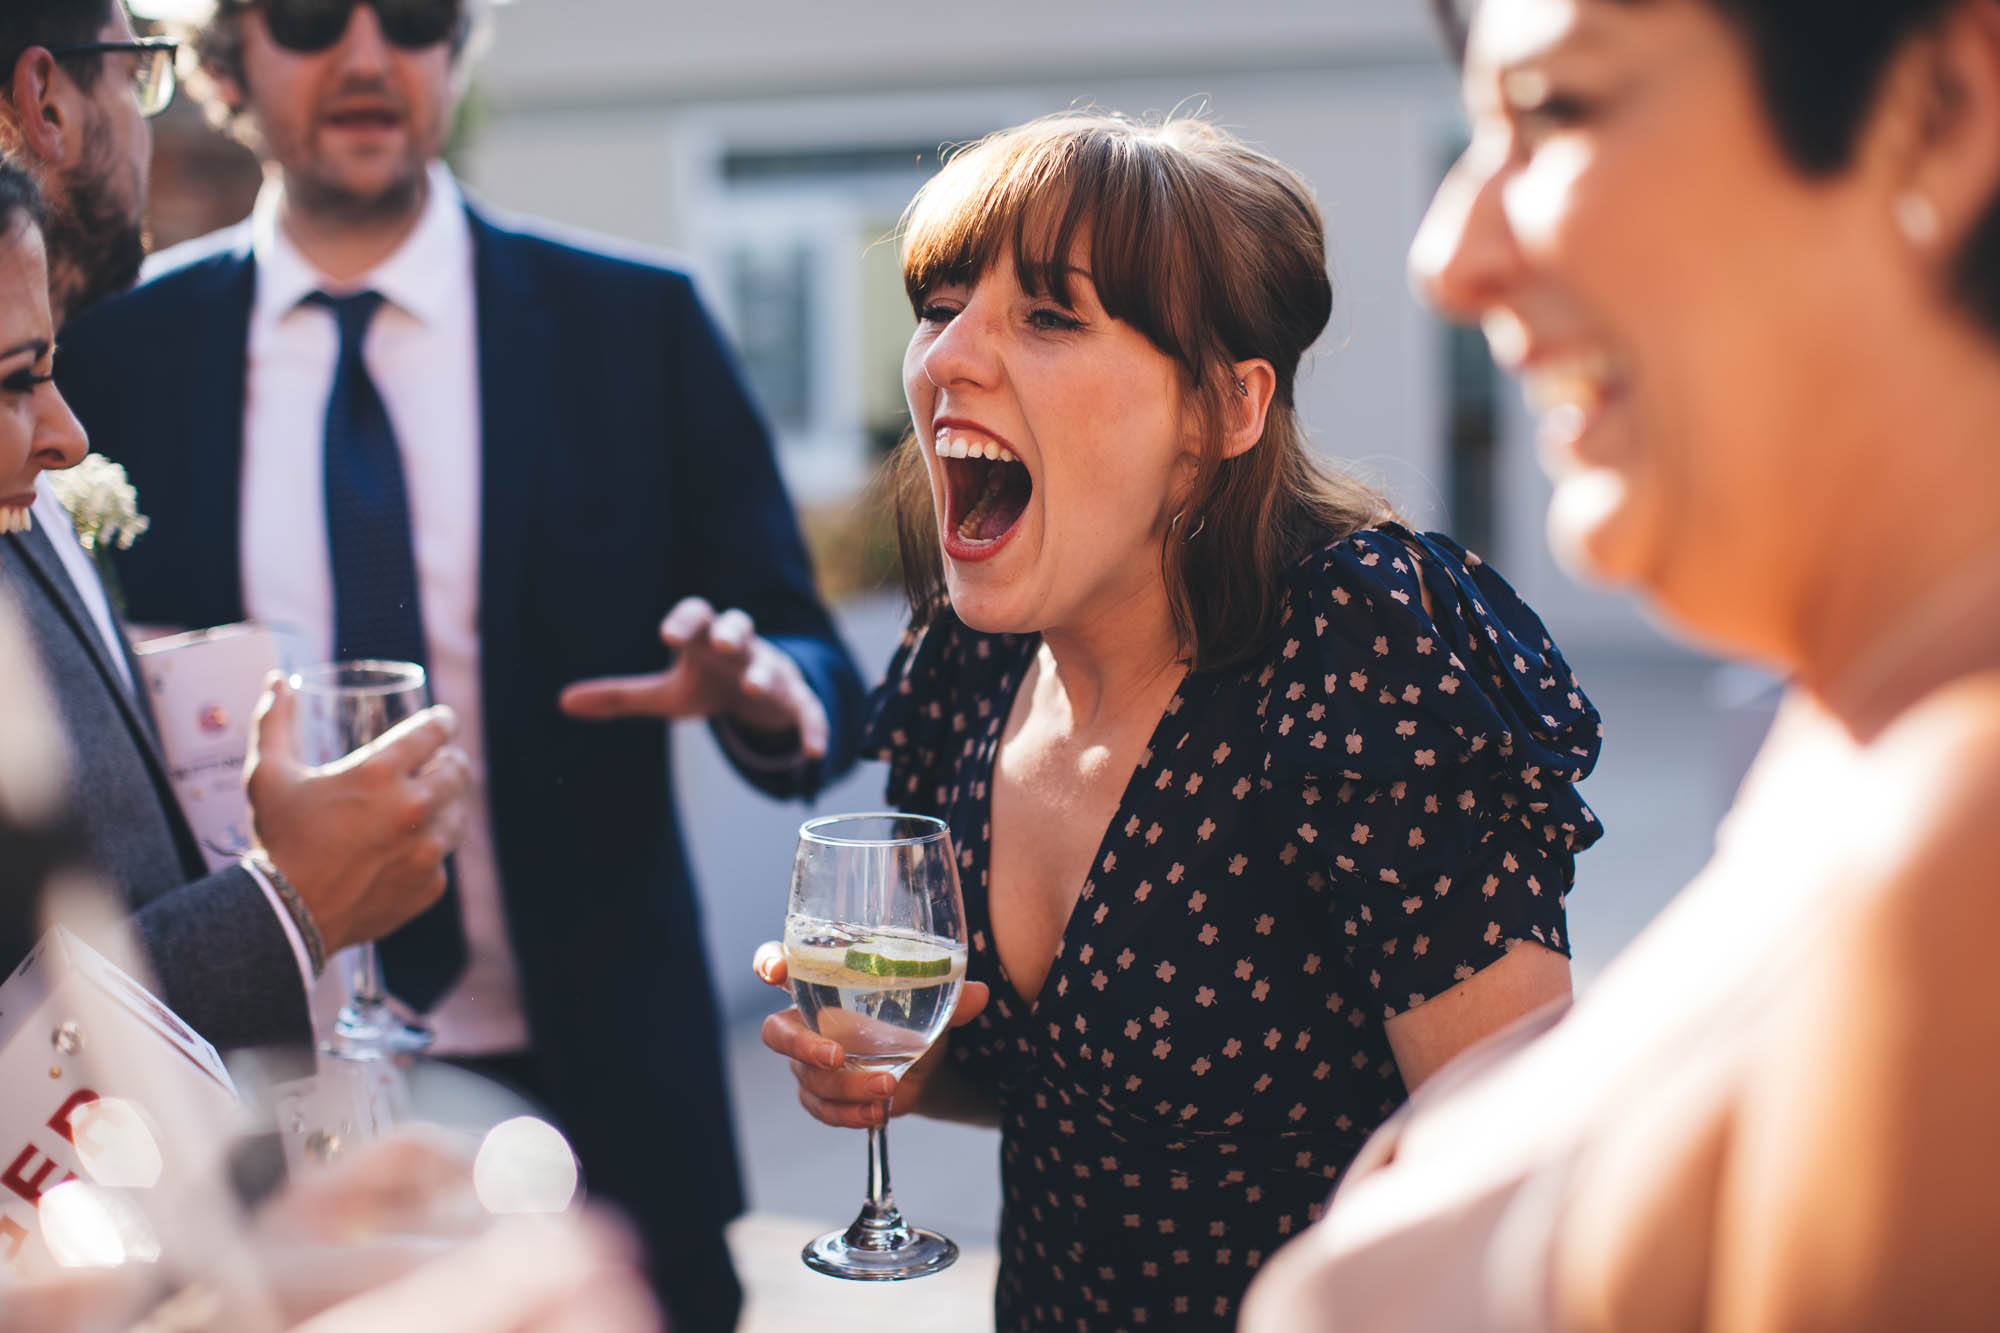 Wedding guest laughs at a joke outside during receptions drinks